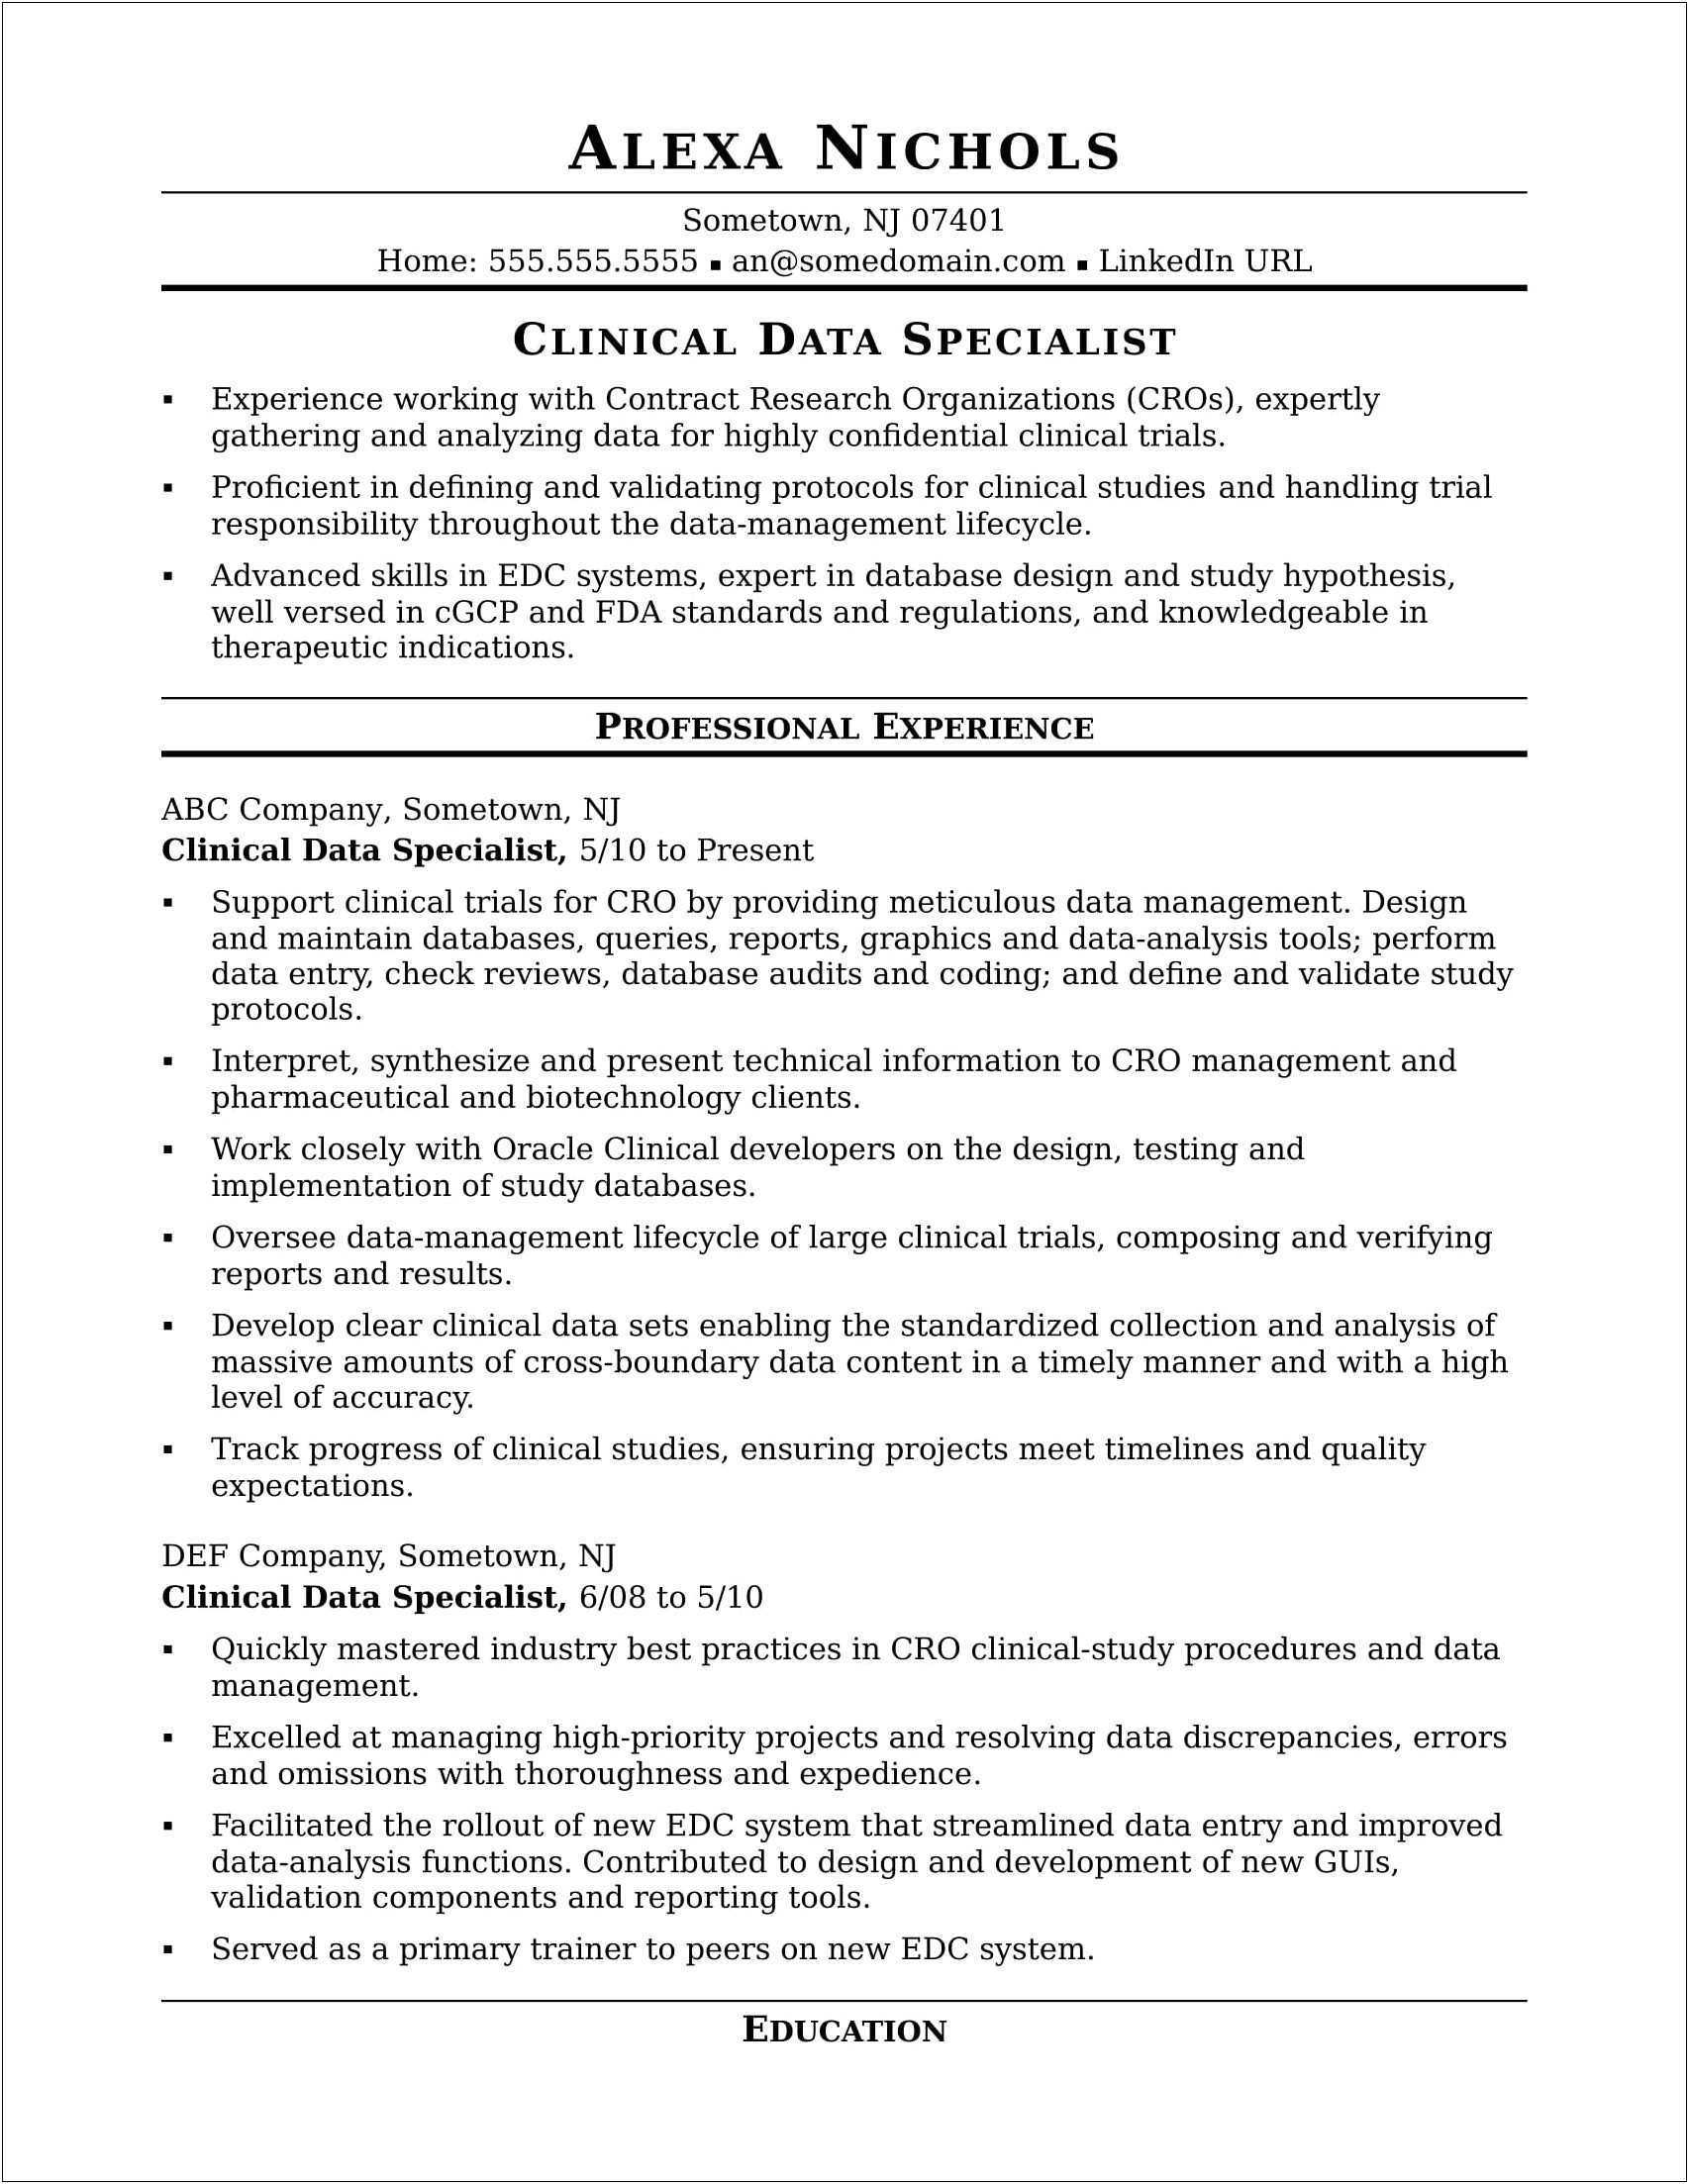 Resume Examples For Contract Specialist